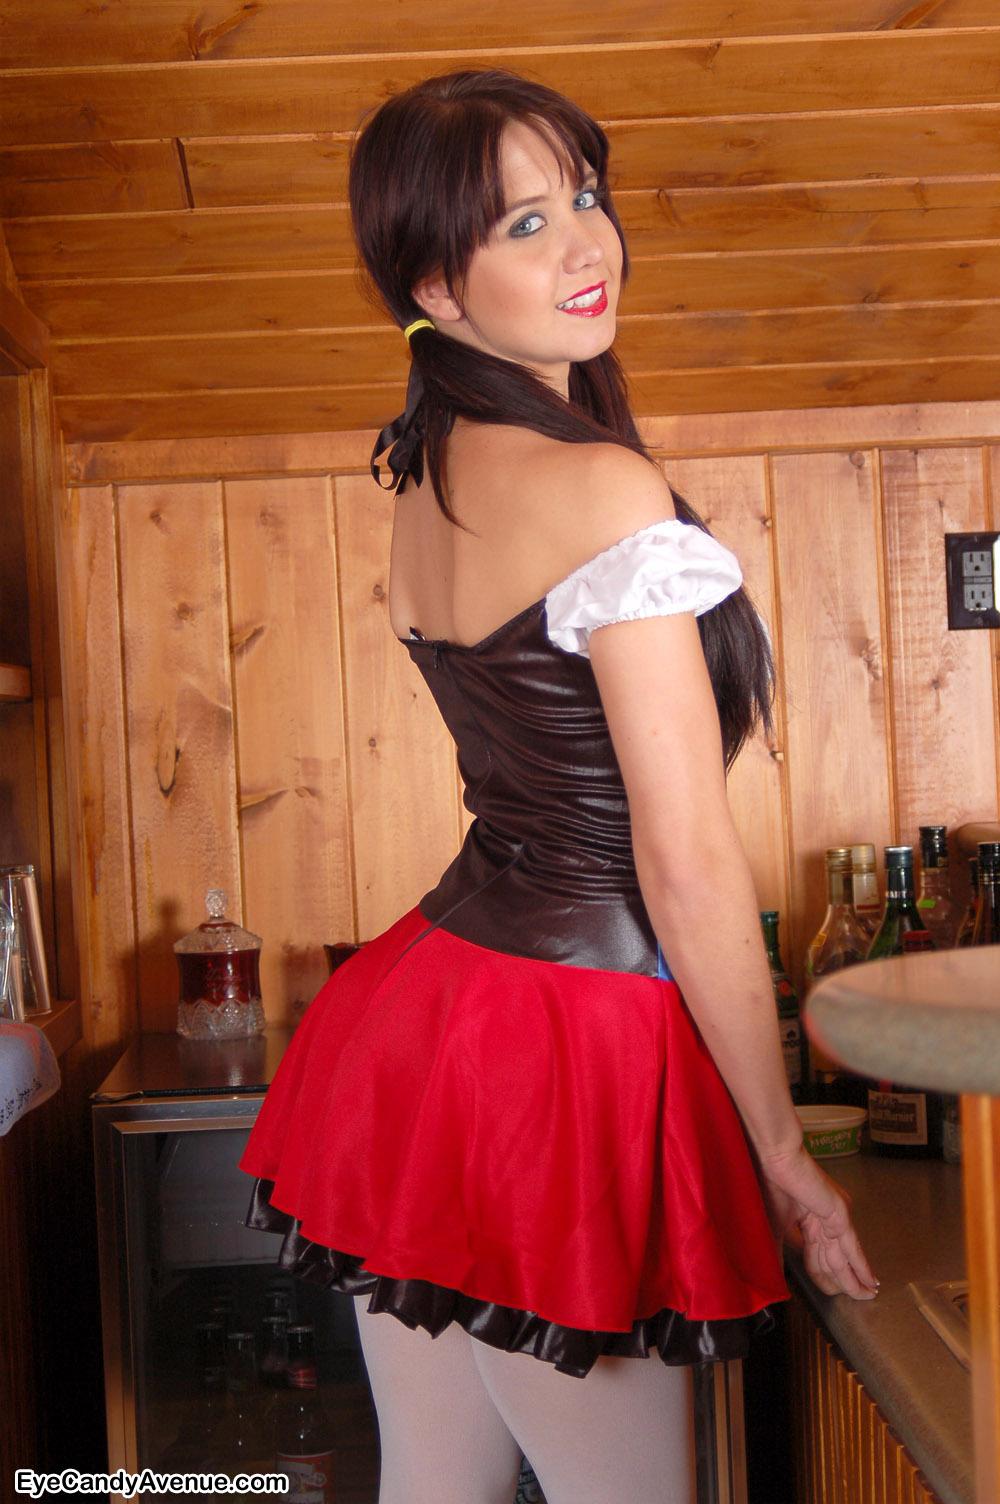 Chrissy Marie dresses up as a super hot german barmaid #53805937